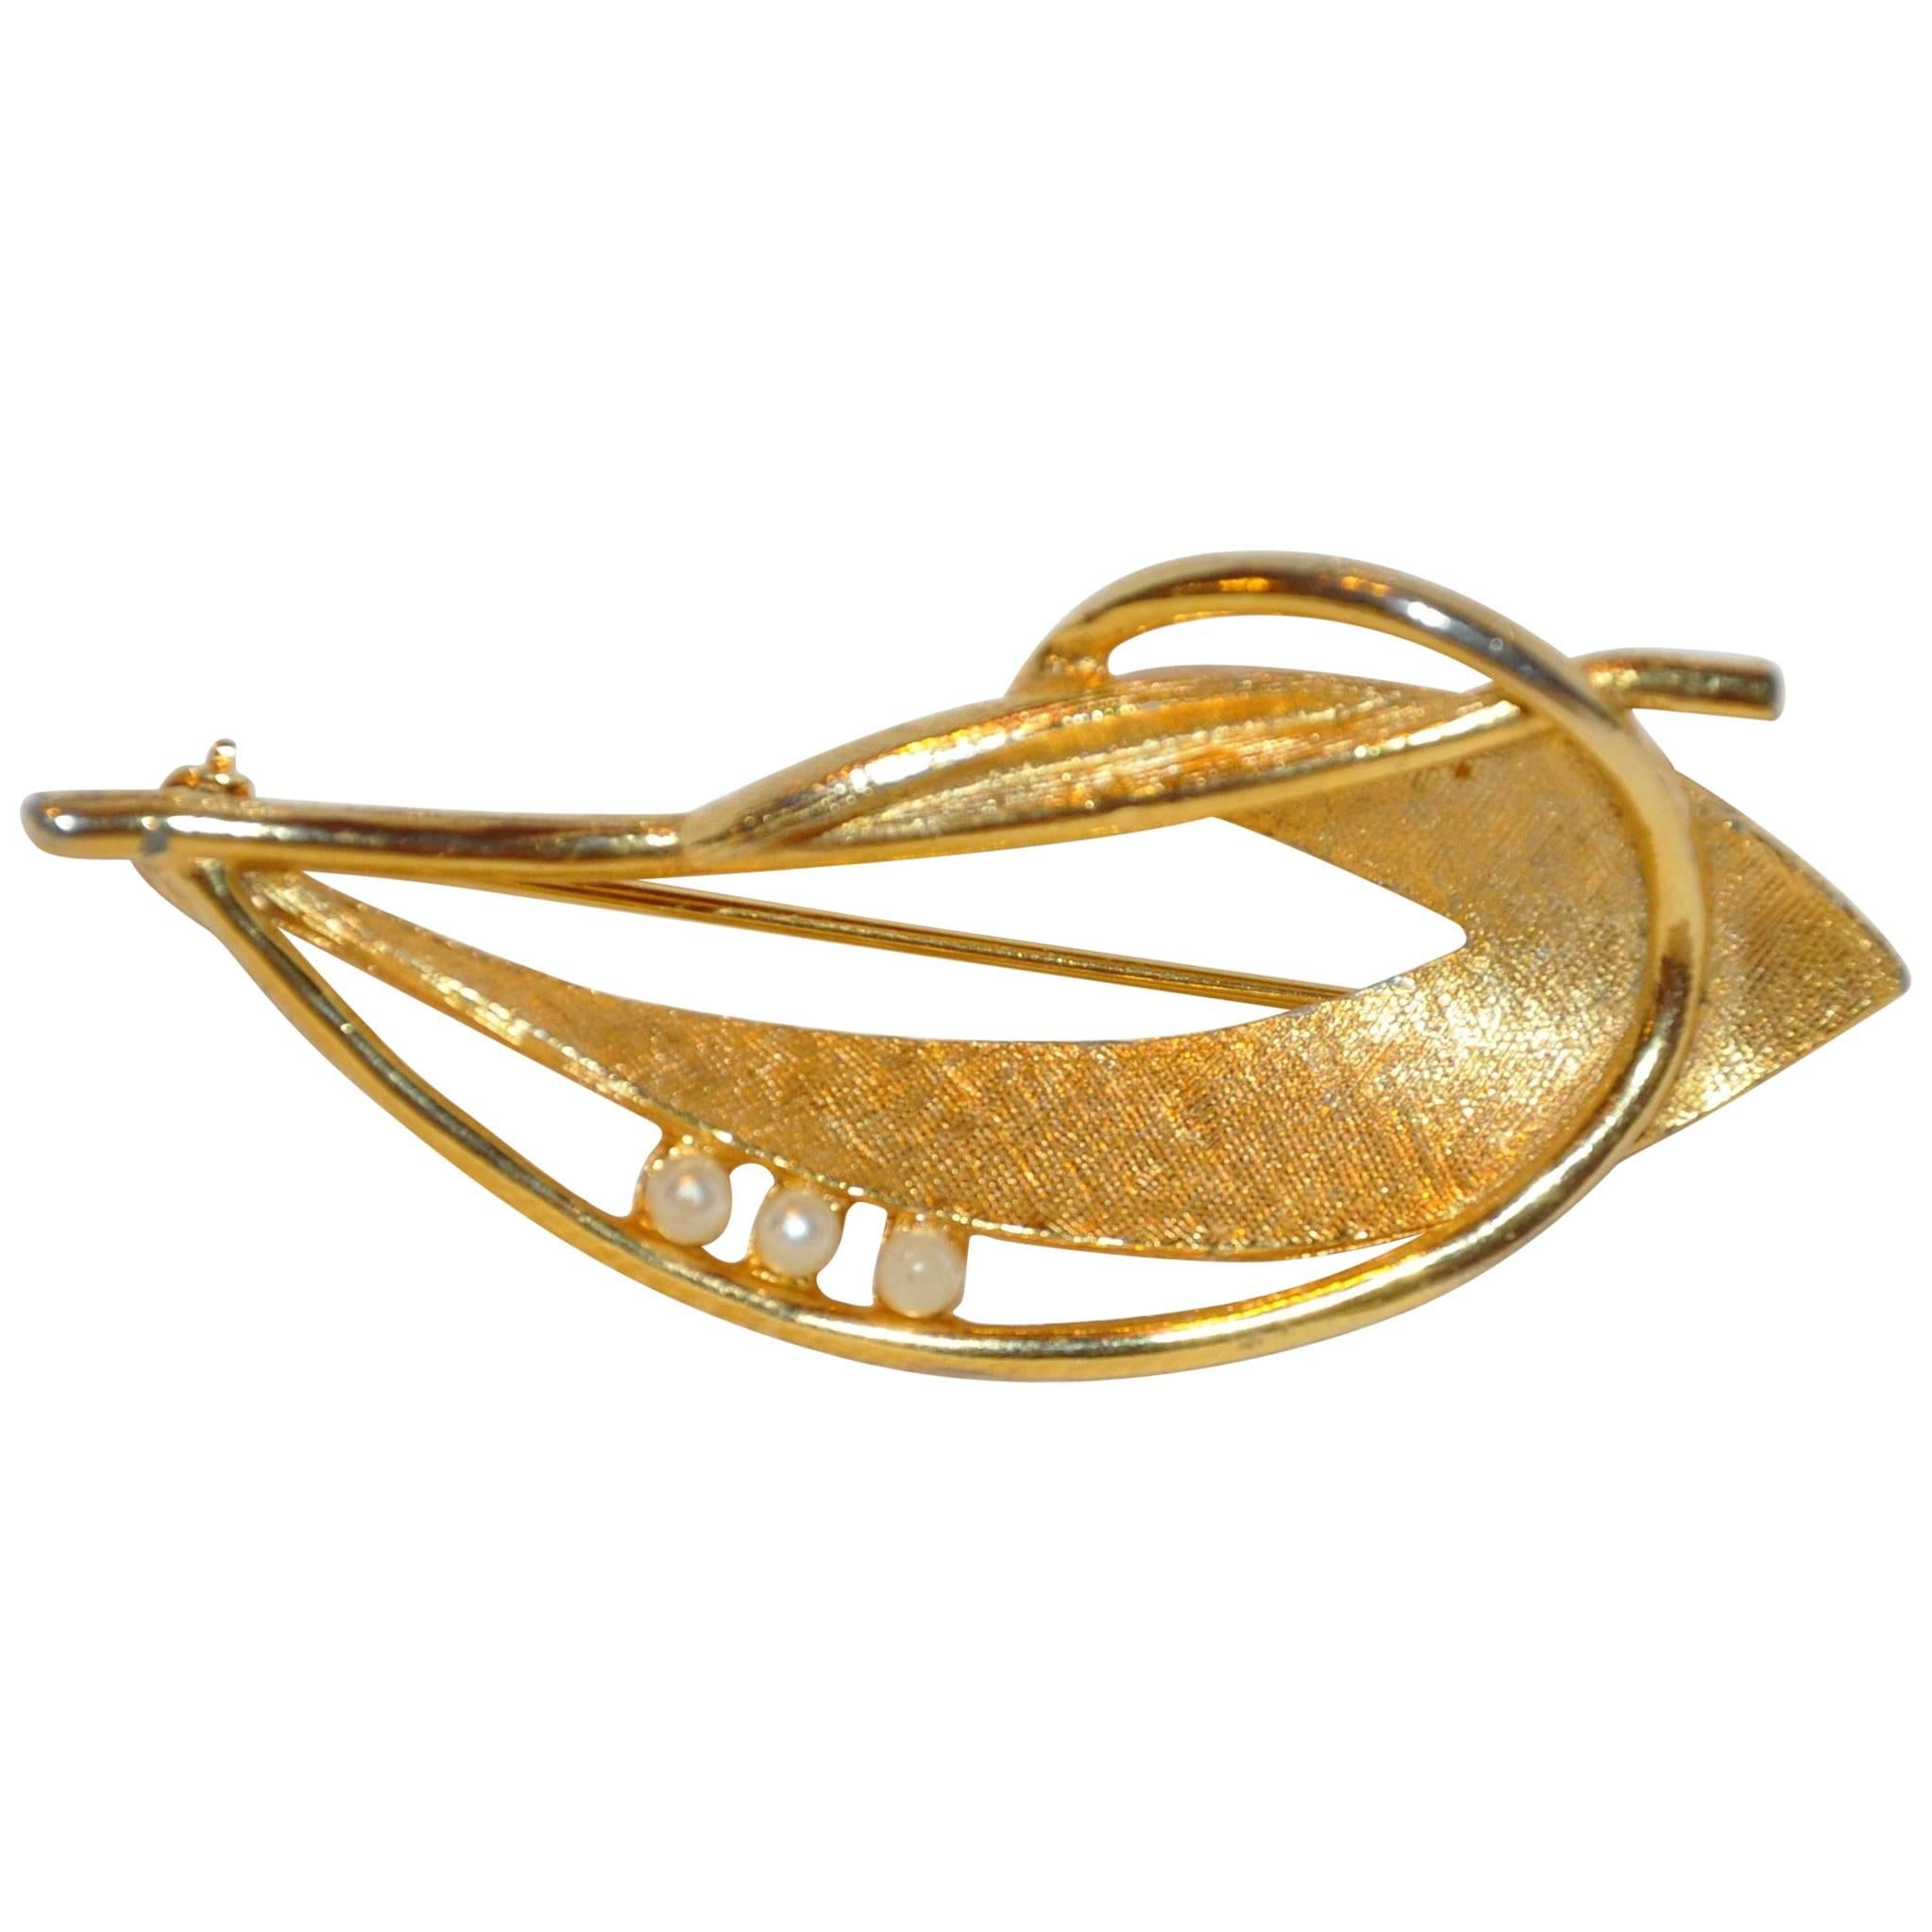 Gilded Textured Gold Vermeil Hardware with Faux Pearls "Leaf & Vine" Brooch For Sale